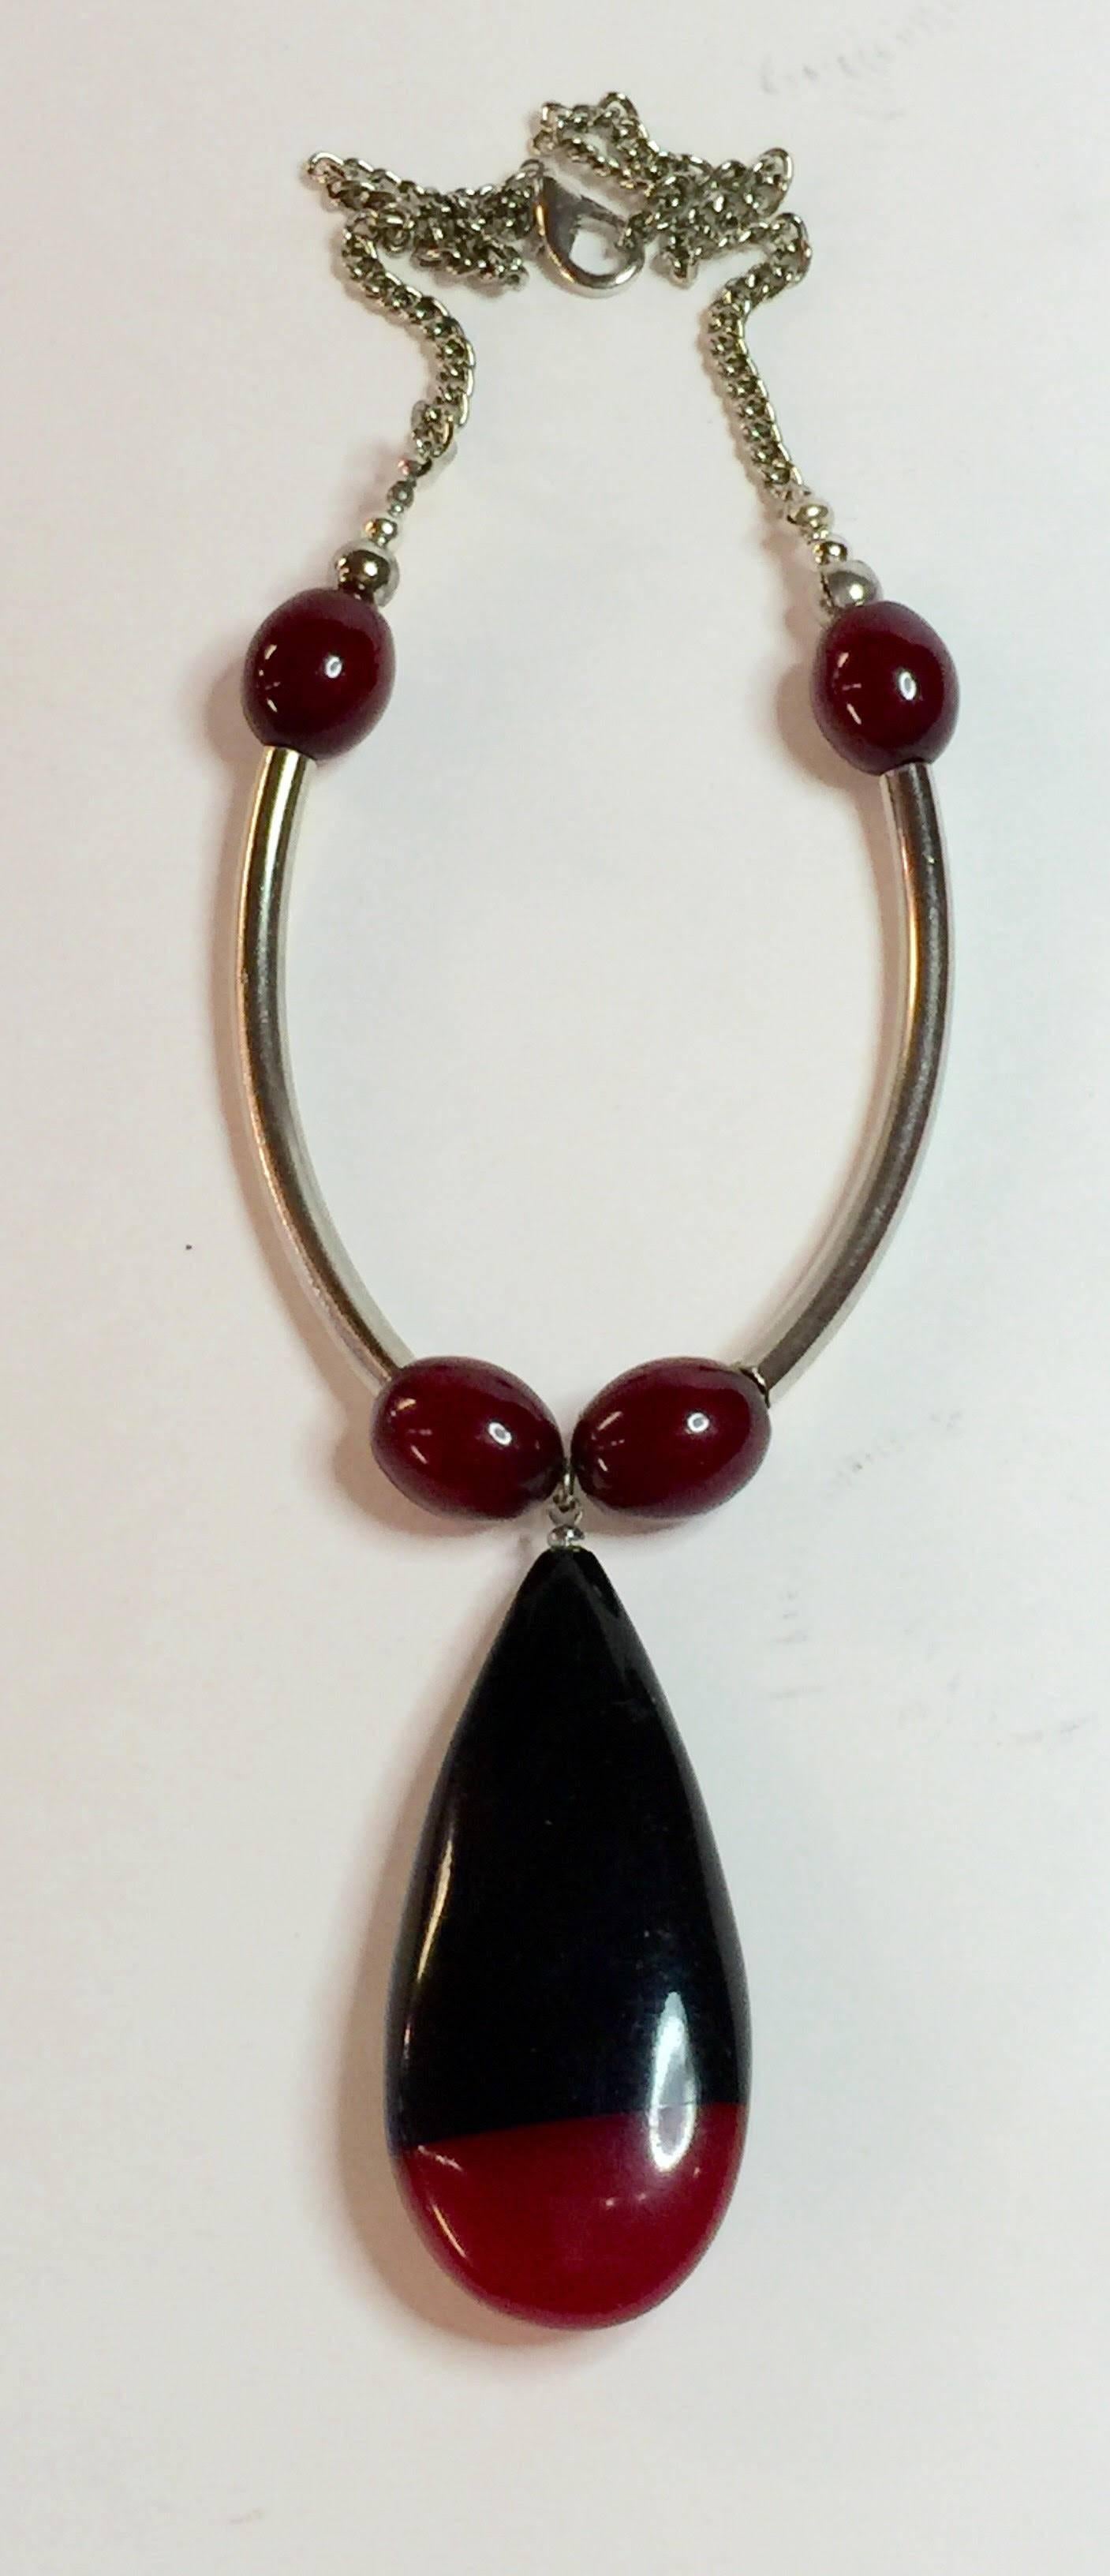 1930s Art Deco German Red Black Galalith Chrome Necklace Jacob Bengel For Sale 1